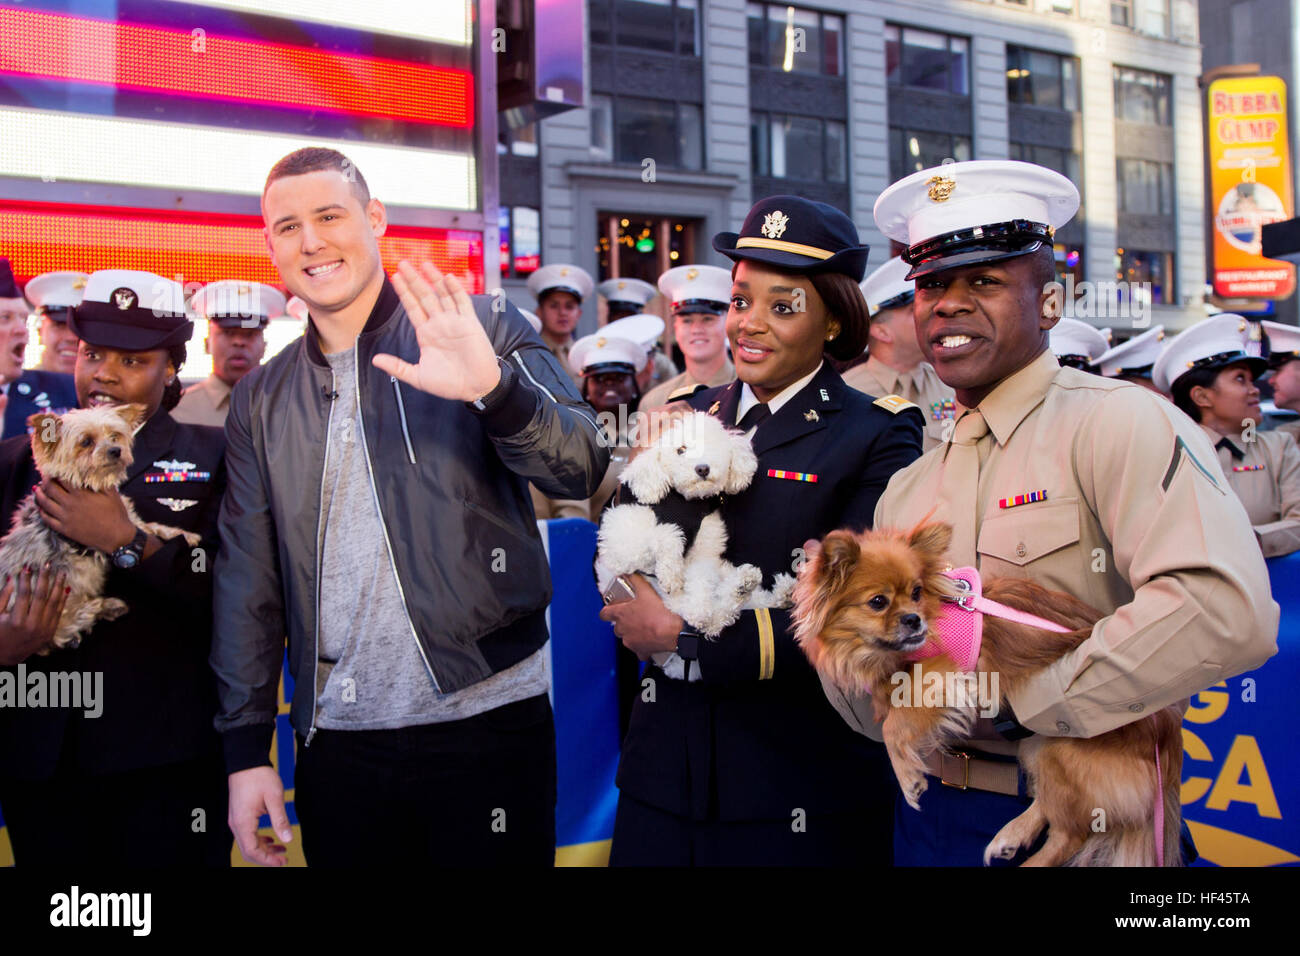 Pfc. Michael Robinson and Sailors hold puppies from the Humane Society of New York with Anthony Rizzo, the first baseman for the Cubs who was also voted most valuable player in the 2016 baseball World Series, on the ABC Good Morning America television show at Times Square in New York City, N.Y., Nov. 11, 2016. Marines and Sailors from the II Marine Expeditionary Force and the USS Iwo Jima are participating in Veterans Week New York City 2016 to honor the service of all our nation’s veterans. (U.S. Marine Corps Photo by Sgt. Anthony Mesa.) ABC Good Morning America Welcomes II MEF Marines 161111 Stock Photo